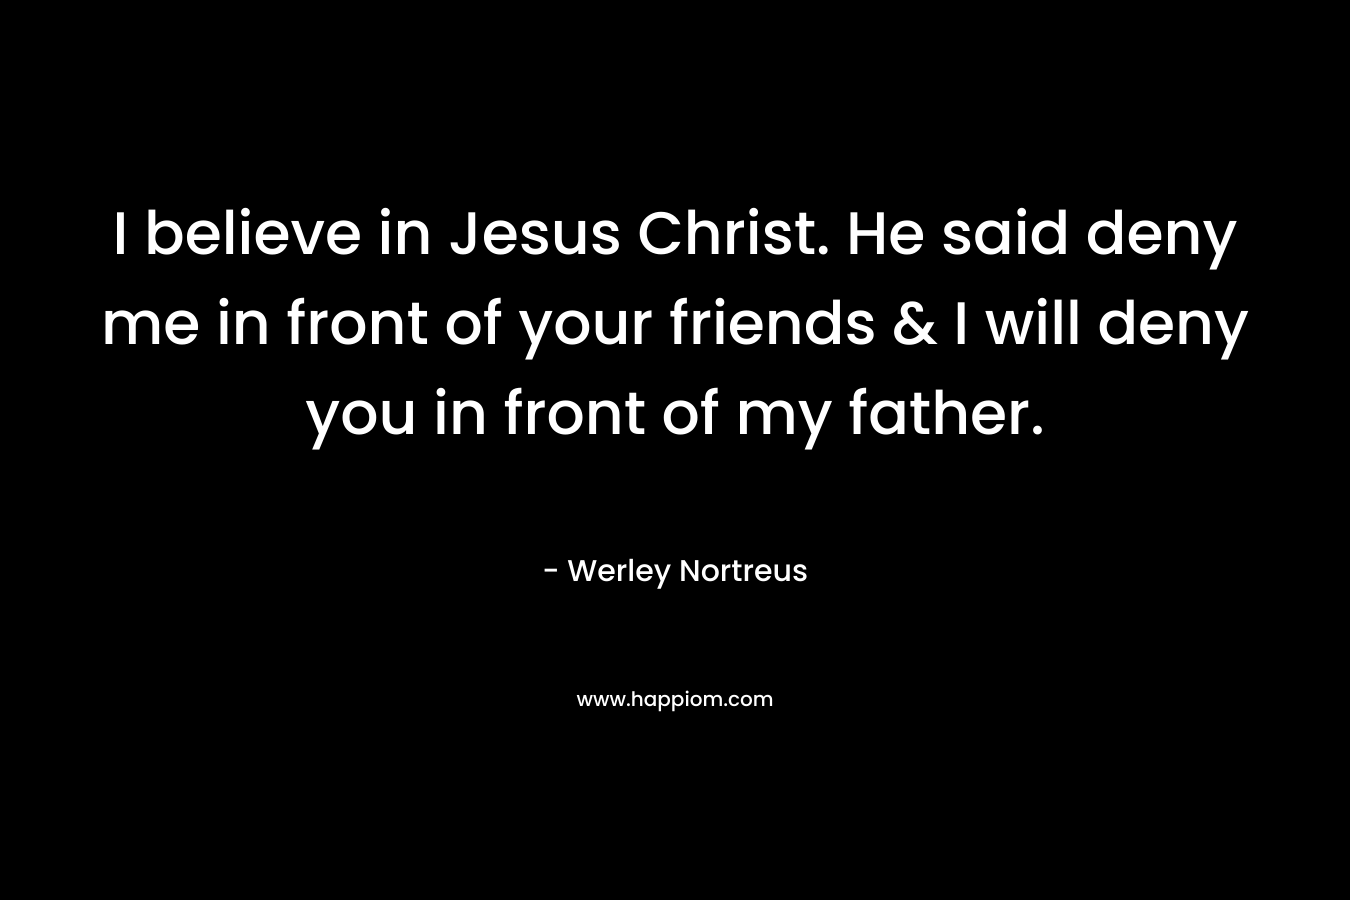 I believe in Jesus Christ. He said deny me in front of your friends & I will deny you in front of my father.